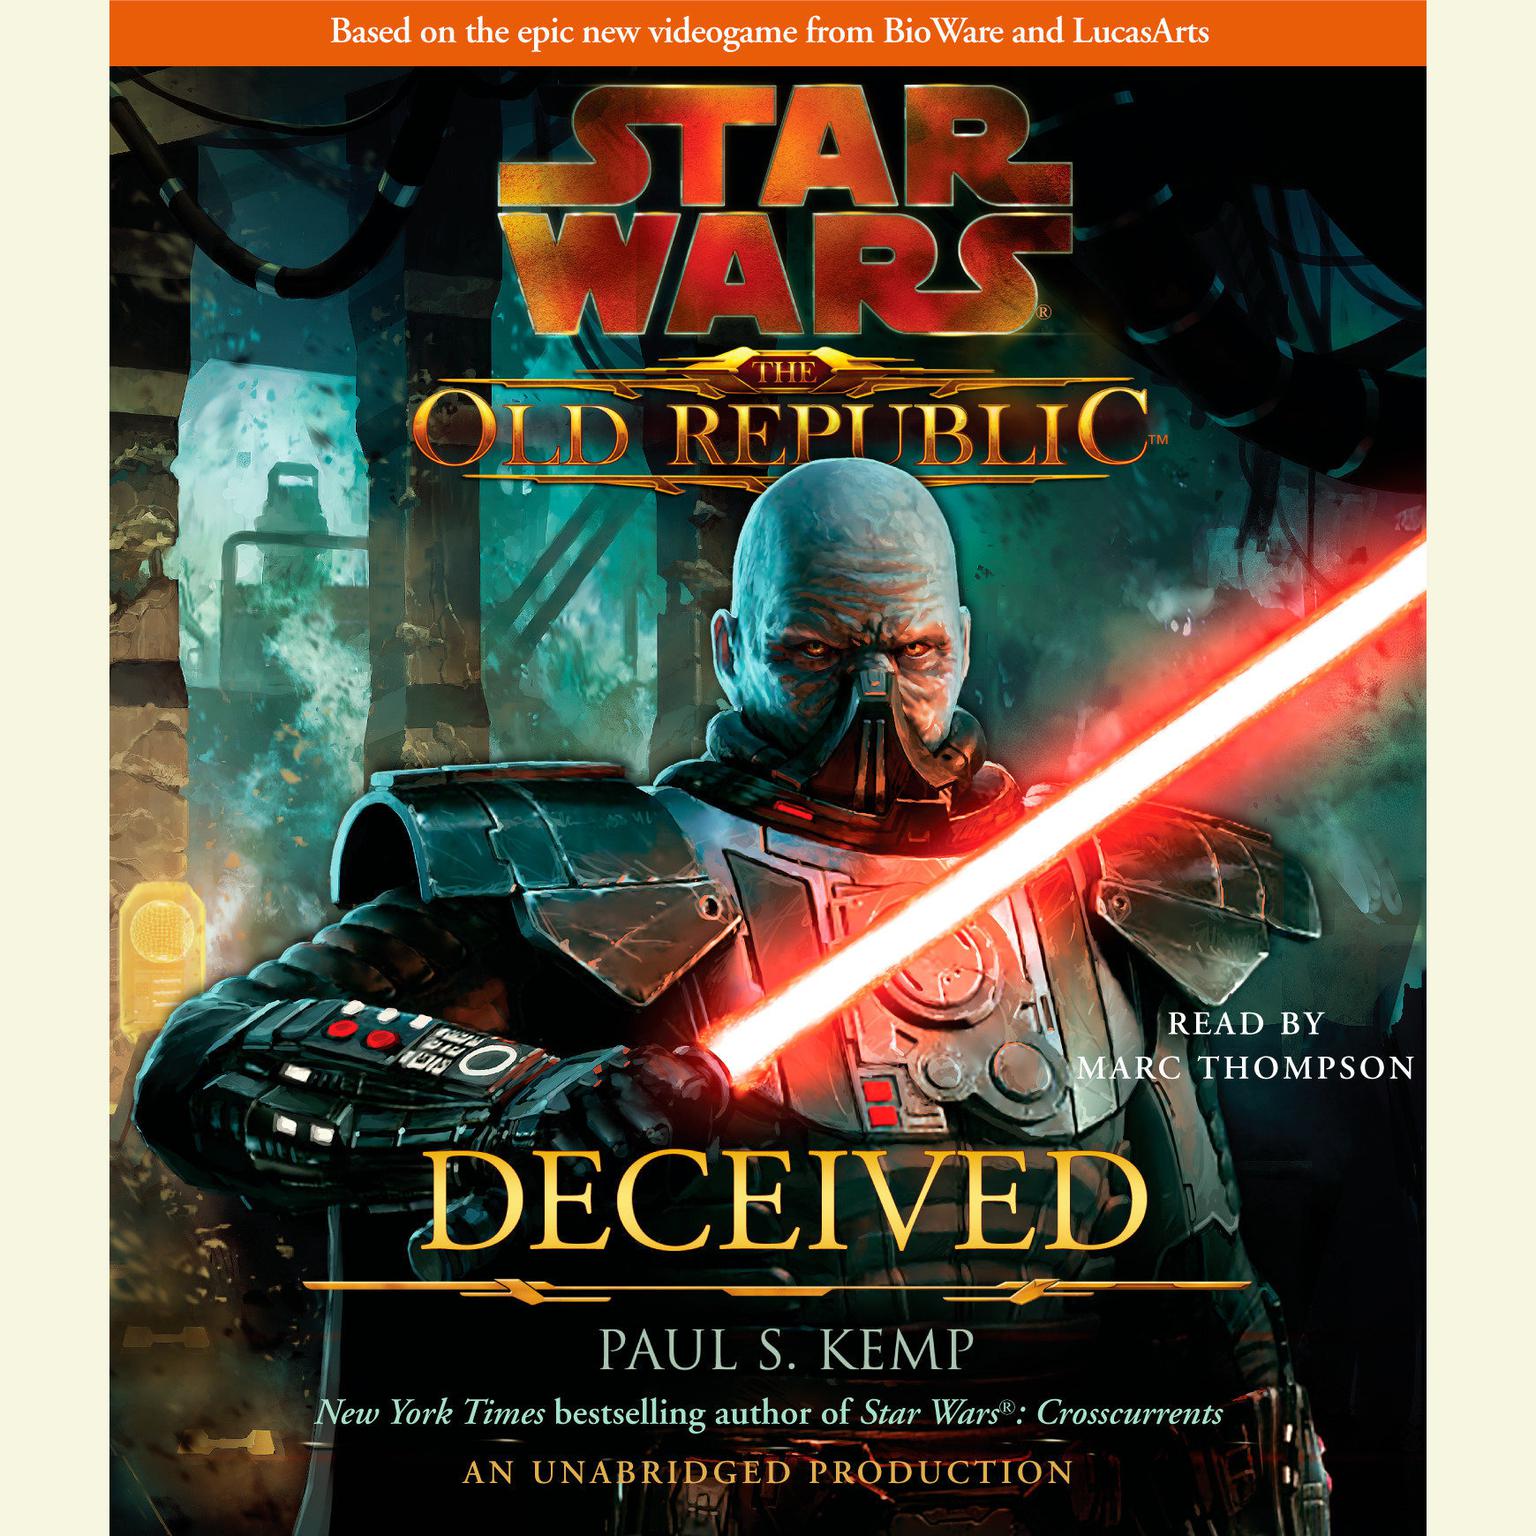 Deceived: Star Wars (The Old Republic) Audiobook, by Paul S. Kemp